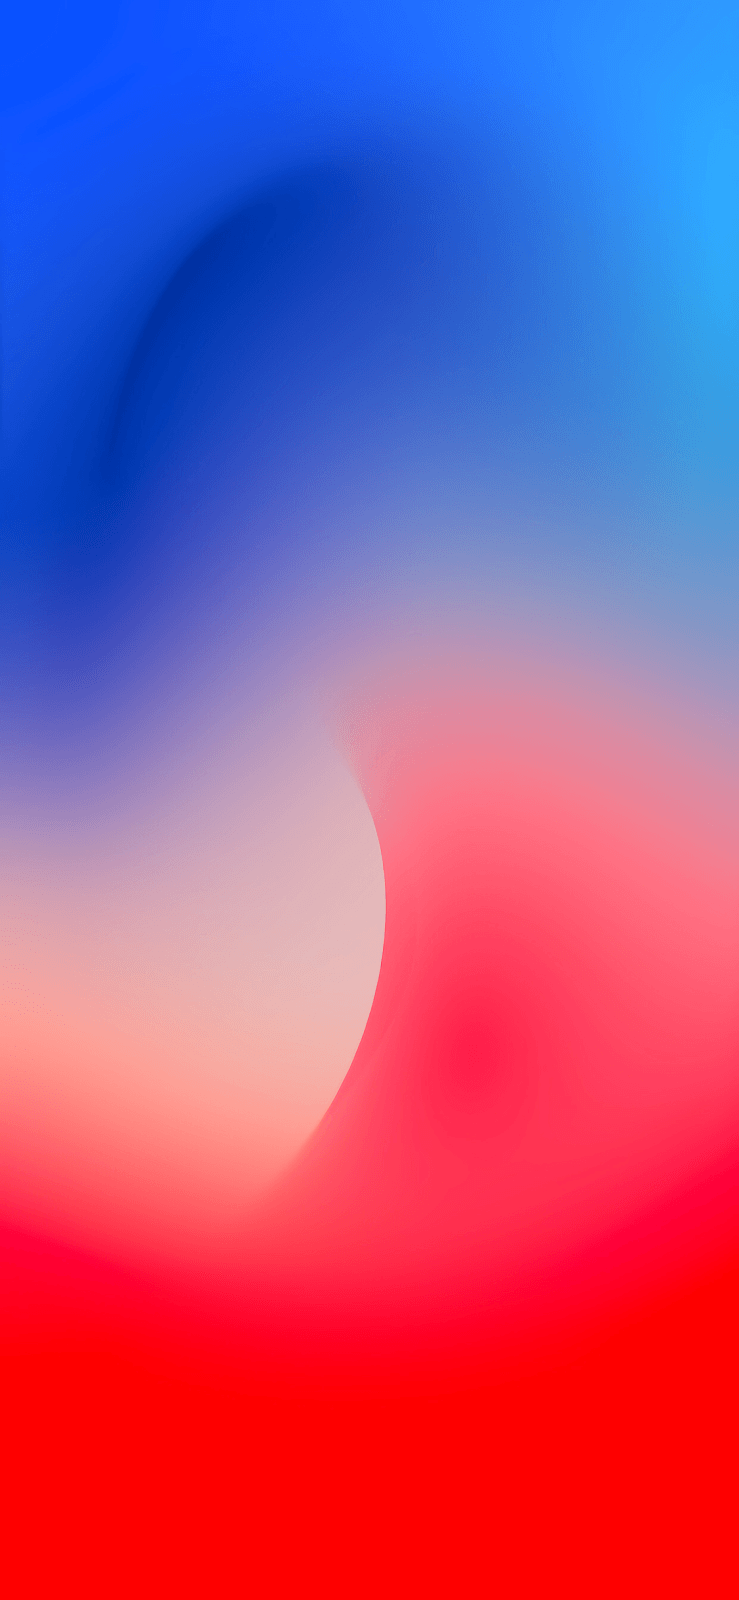 Fluid Blue and Red by AR72014. iPhone homescreen wallpaper, 4k